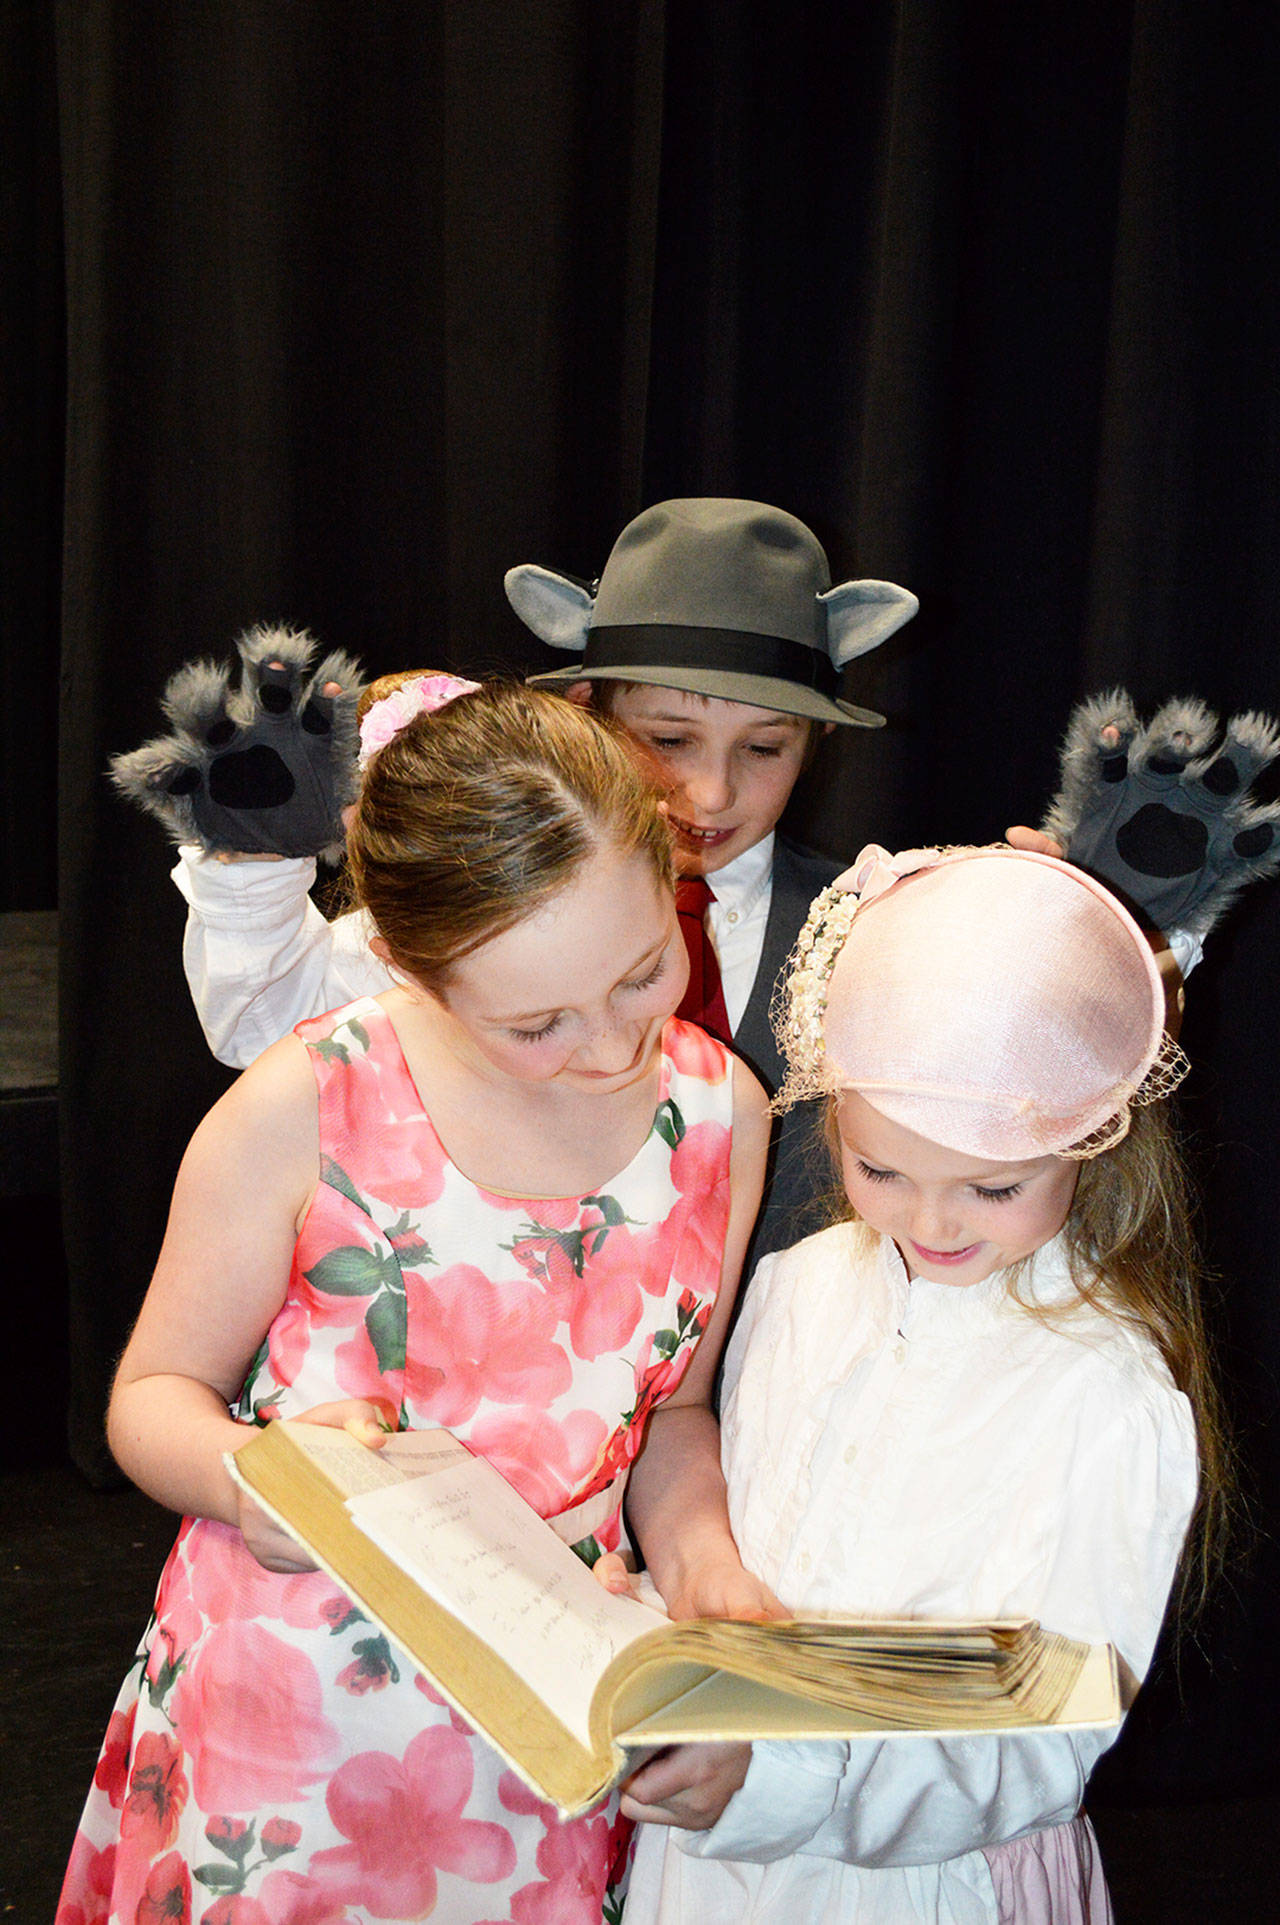 The Big Bad Wolf, played by Finn Waknitz, sneaks up on Miss Muffit played by Maria Burke, left, and Sarah Butterworth. Photo by Brandi Welch